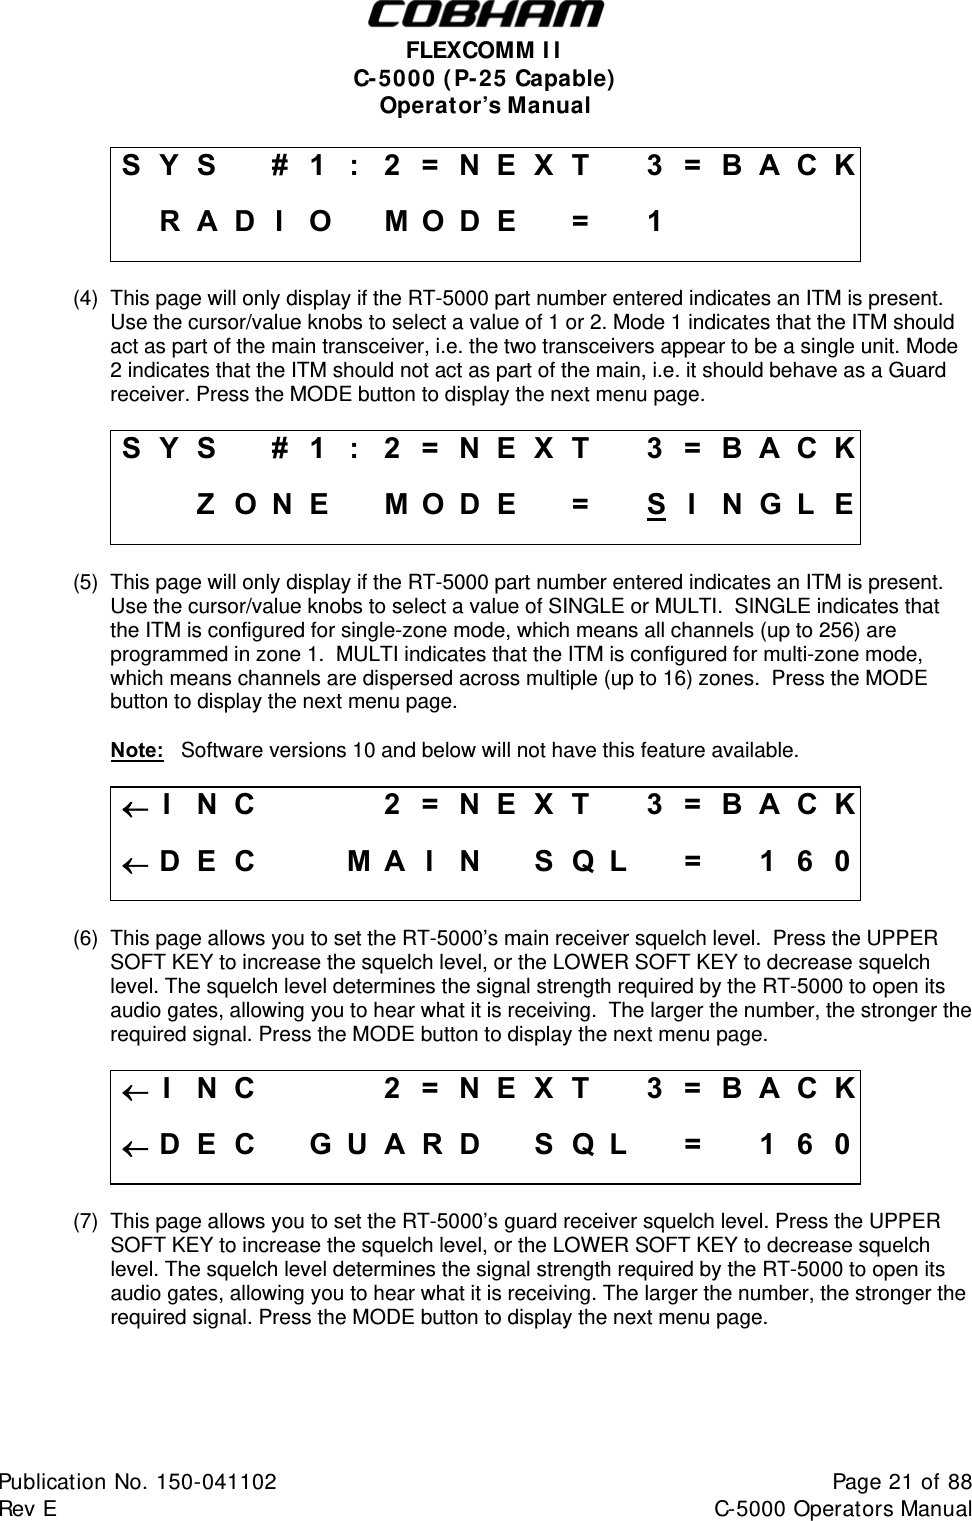  FLEXCOMM II C-5000 (P-25 Capable) Operator’s Manual S Y S    #  1  :  2 = N E X T   3 = B A C K  R A D I O  M O D E  =  1          (4)  This page will only display if the RT-5000 part number entered indicates an ITM is present. Use the cursor/value knobs to select a value of 1 or 2. Mode 1 indicates that the ITM should act as part of the main transceiver, i.e. the two transceivers appear to be a single unit. Mode 2 indicates that the ITM should not act as part of the main, i.e. it should behave as a Guard receiver. Press the MODE button to display the next menu page.  S Y S    #  1  :  2 = N E X T   3 = B A C K    Z O N E  MODE  =  SIN G L E (5)  This page will only display if the RT-5000 part number entered indicates an ITM is present. Use the cursor/value knobs to select a value of SINGLE or MULTI.  SINGLE indicates that the ITM is configured for single-zone mode, which means all channels (up to 256) are programmed in zone 1.  MULTI indicates that the ITM is configured for multi-zone mode, which means channels are dispersed across multiple (up to 16) zones.  Press the MODE button to display the next menu page.  Note:   Software versions 10 and below will not have this feature available.  I  N C        2 = N E X T   3 = B A C K D E C    M A I N  S Q L  =  1 6 0 (6)  This page allows you to set the RT-5000’s main receiver squelch level.  Press the UPPER SOFT KEY to increase the squelch level, or the LOWER SOFT KEY to decrease squelch level. The squelch level determines the signal strength required by the RT-5000 to open its audio gates, allowing you to hear what it is receiving.  The larger the number, the stronger the required signal. Press the MODE button to display the next menu page.  I  N C        2 = N E X T   3 = B A C K D E C  G UARD  SQL  =  1 6 0 (7)  This page allows you to set the RT-5000’s guard receiver squelch level. Press the UPPER SOFT KEY to increase the squelch level, or the LOWER SOFT KEY to decrease squelch level. The squelch level determines the signal strength required by the RT-5000 to open its audio gates, allowing you to hear what it is receiving. The larger the number, the stronger the required signal. Press the MODE button to display the next menu page.  Publication No. 150-041102  Page 21 of 88  Rev E  C-5000 Operators Manual    